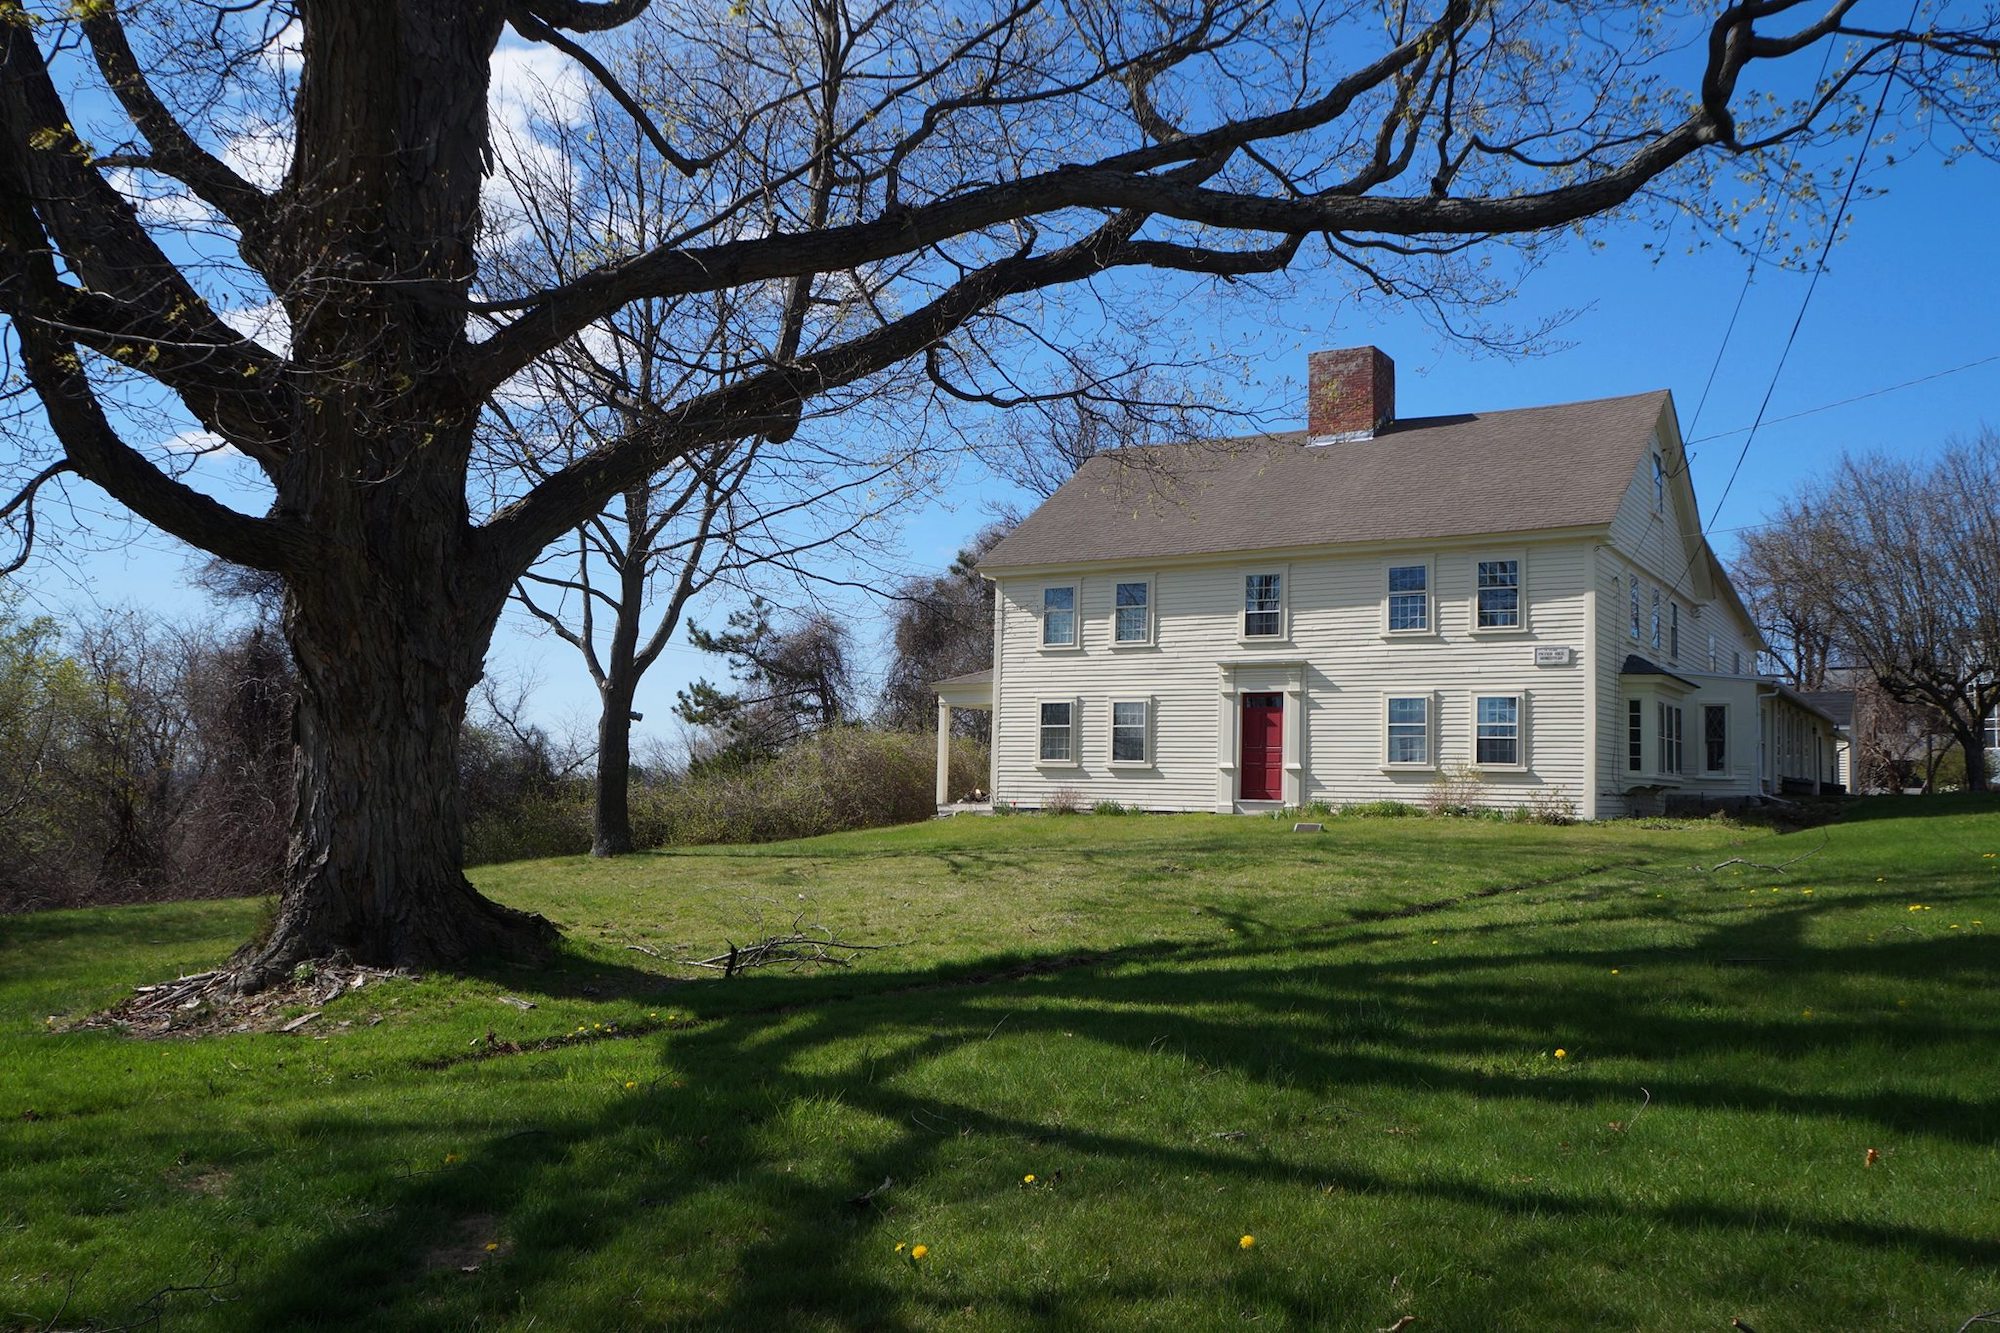 Peter Rice Homestead is home to Marlborough’s rich history